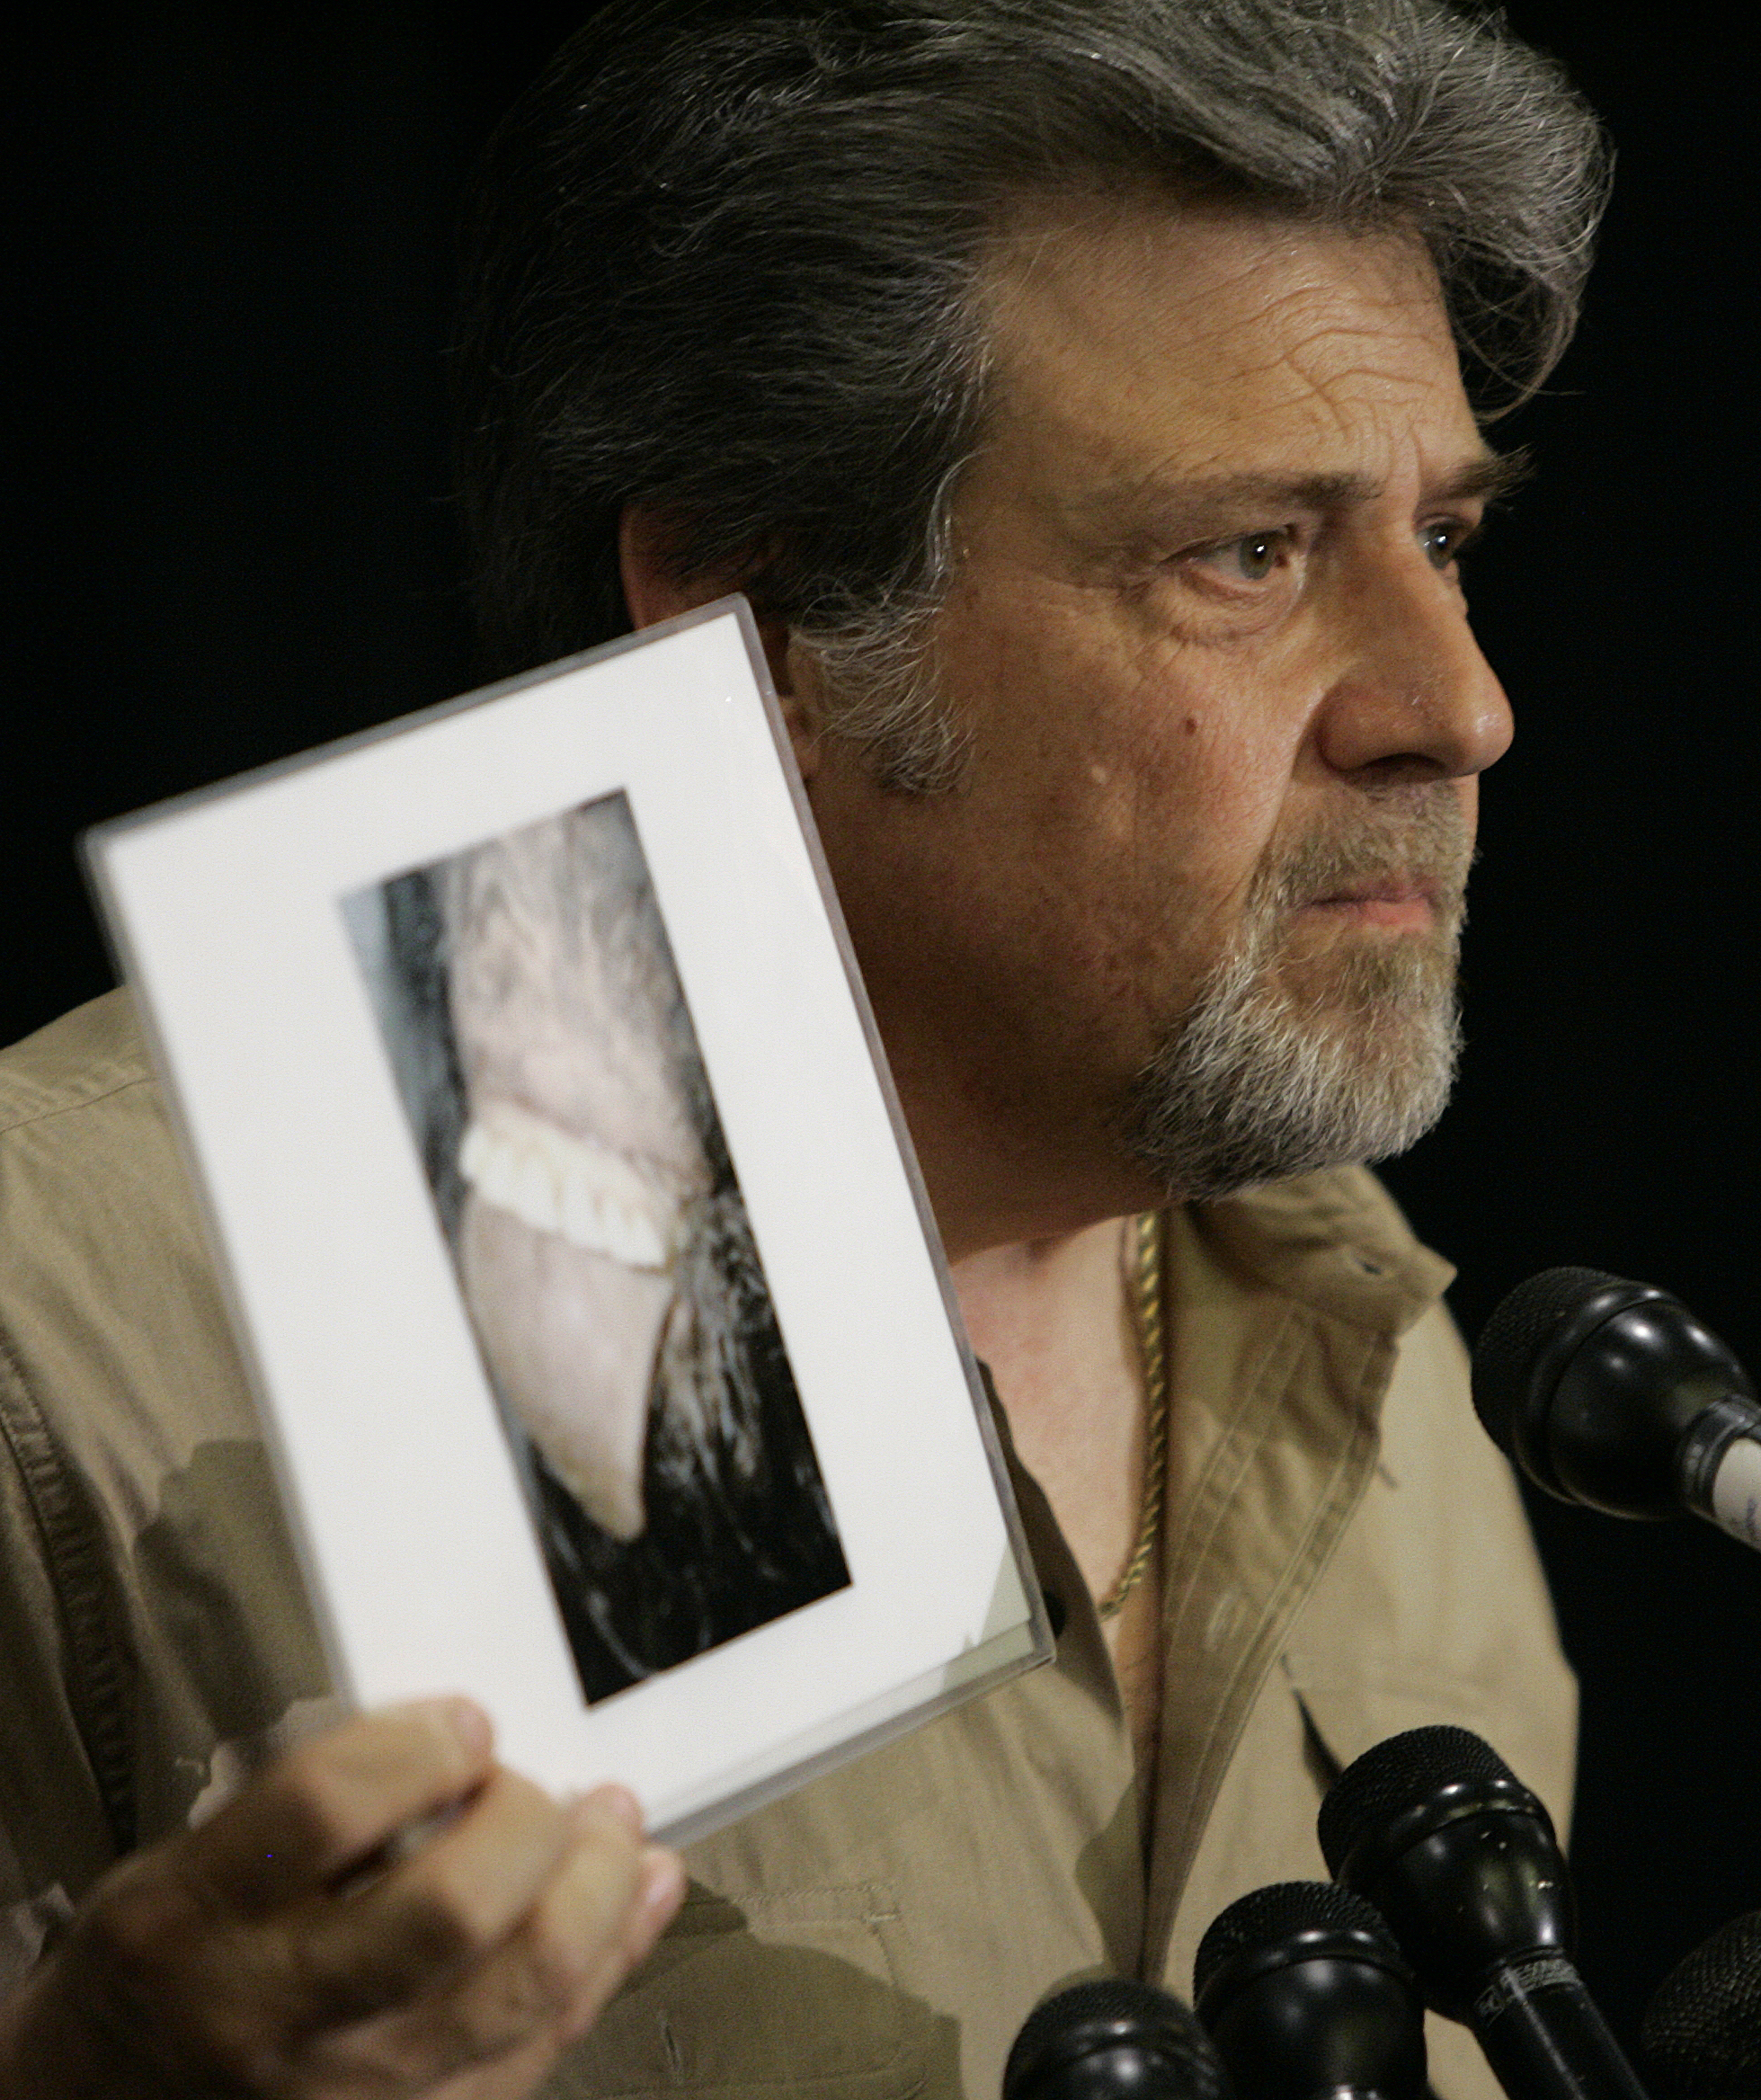 Bigfoot hunter Tom Biscardi holds a photo of what he claims to be the mouth and teeth of a deceased bigfoot or sasquatch creature during a news conference Friday, Aug. 15, 2008, in Palo Alto, Calif.